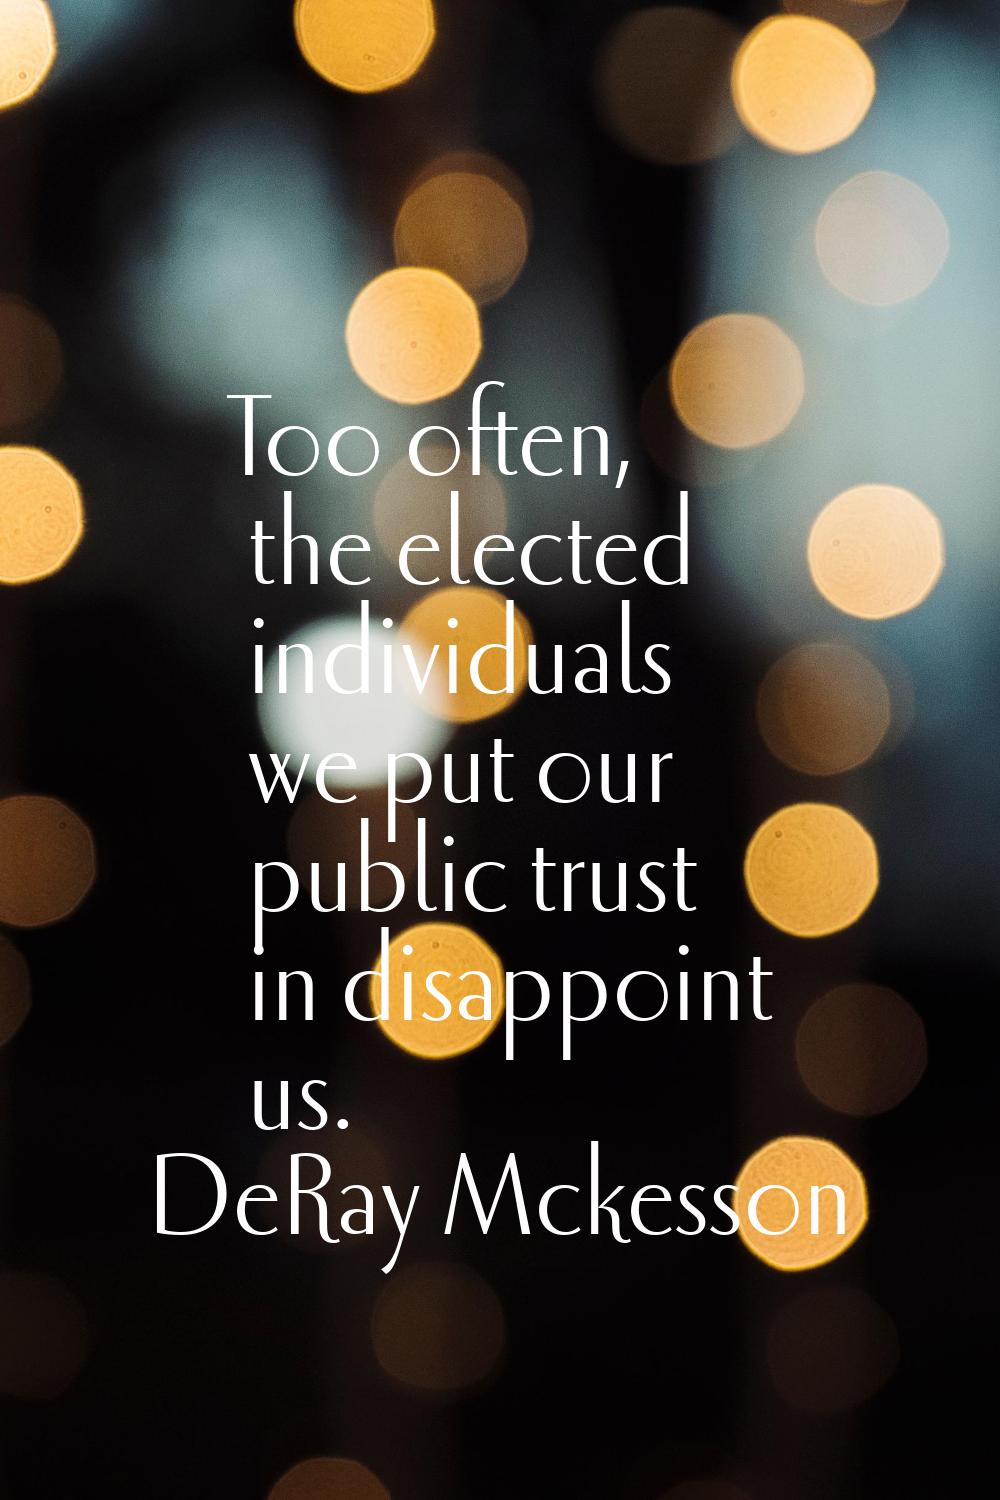 Too often, the elected individuals we put our public trust in disappoint us.